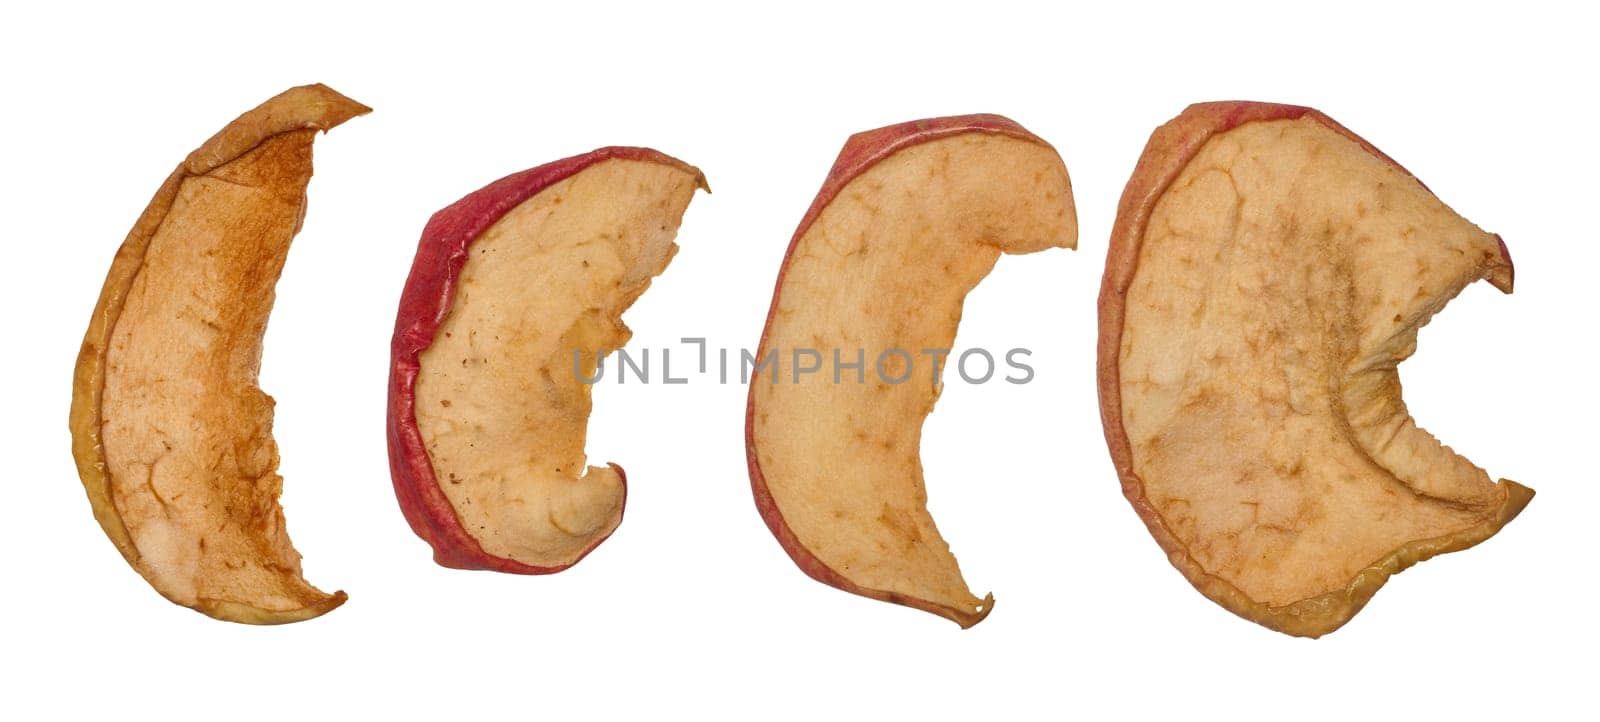 Dried apple slices on isolated background by ndanko